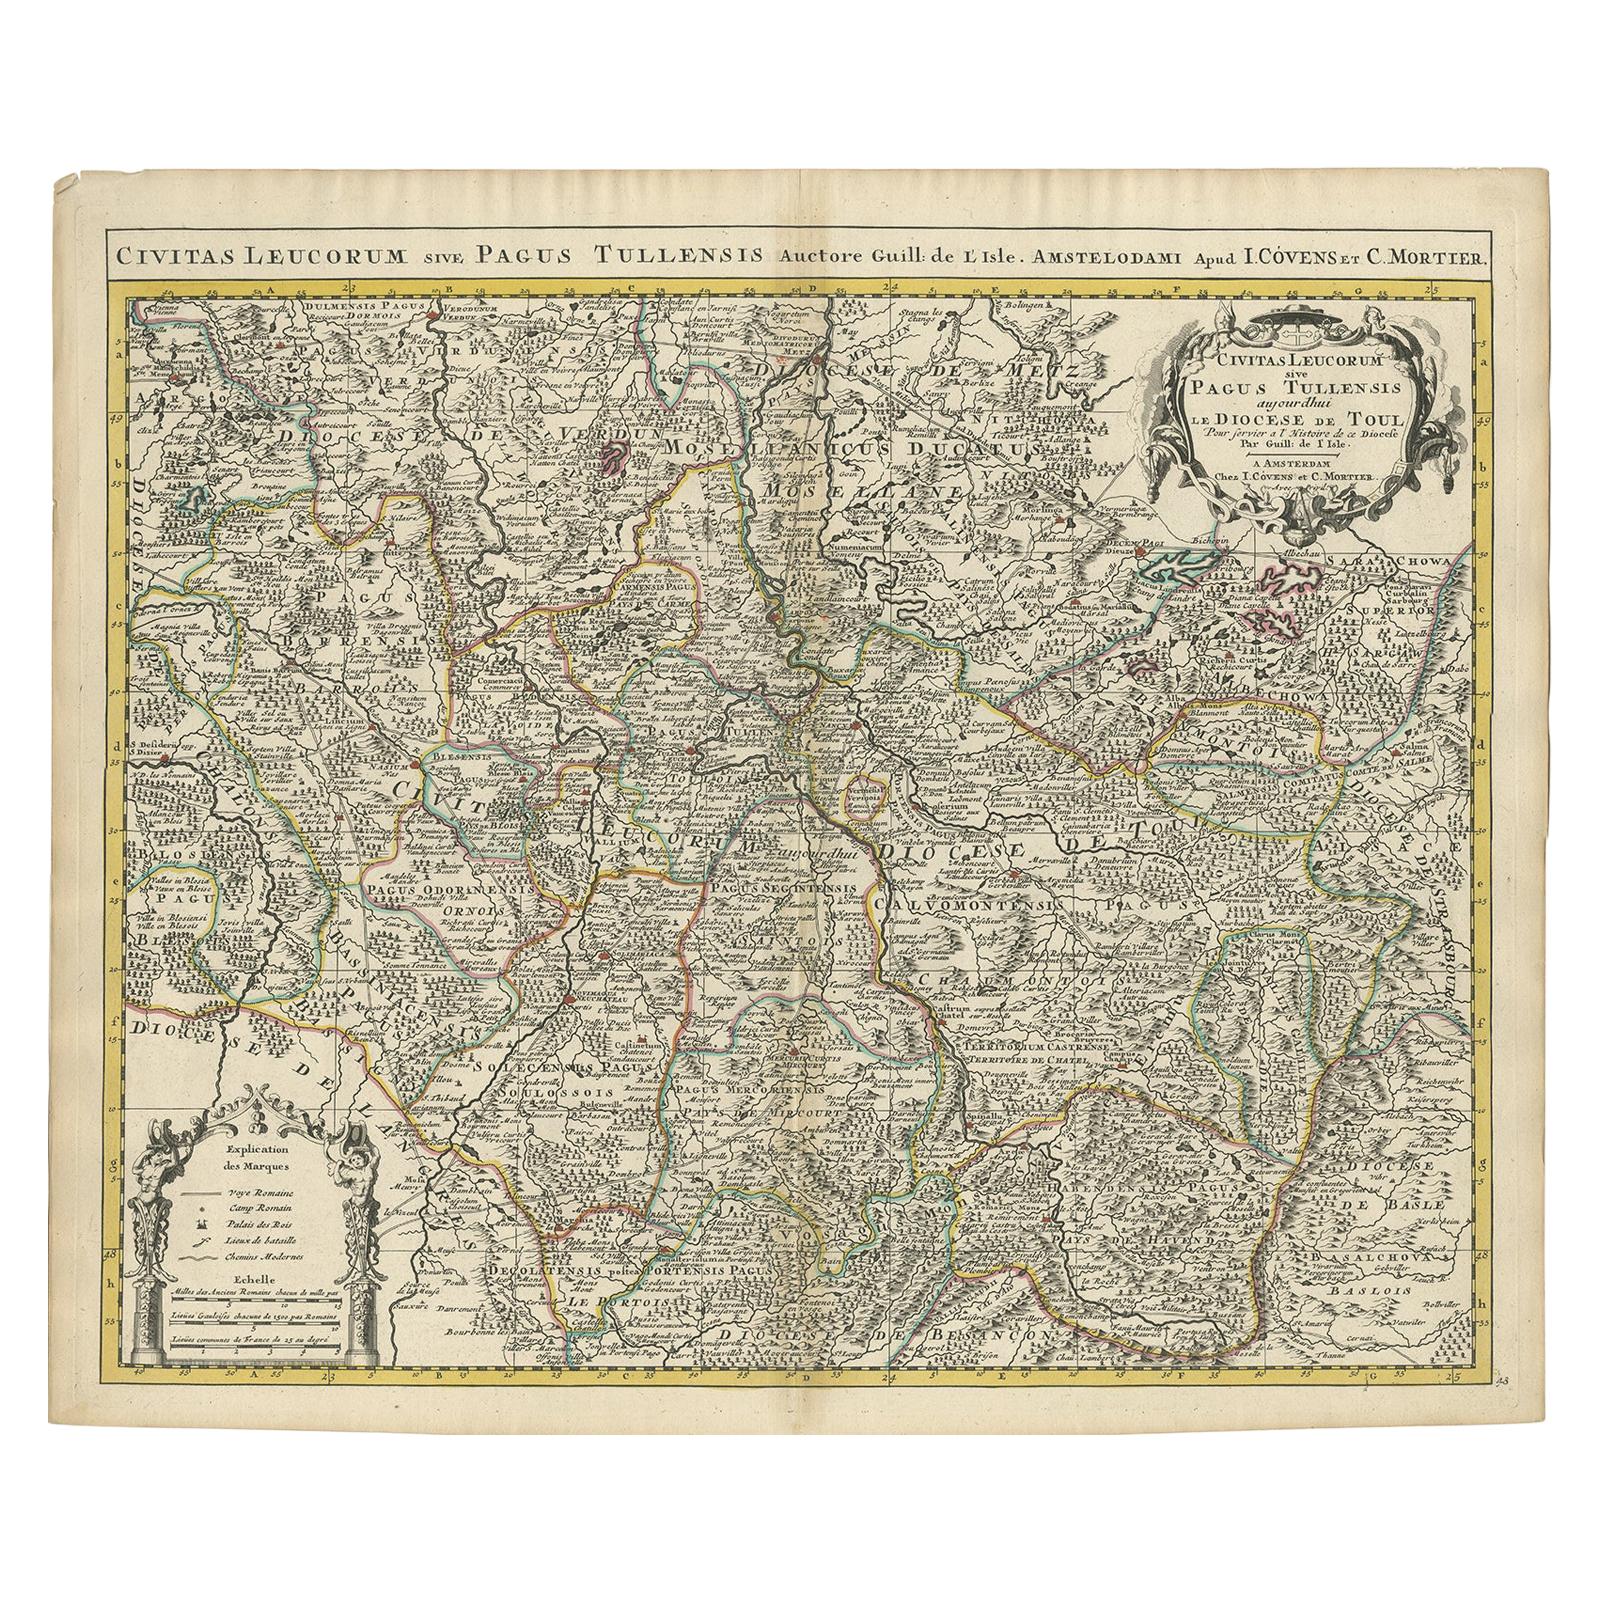 Antique Map of the Diocese of Toul by Covens & Mortier, circa 1720